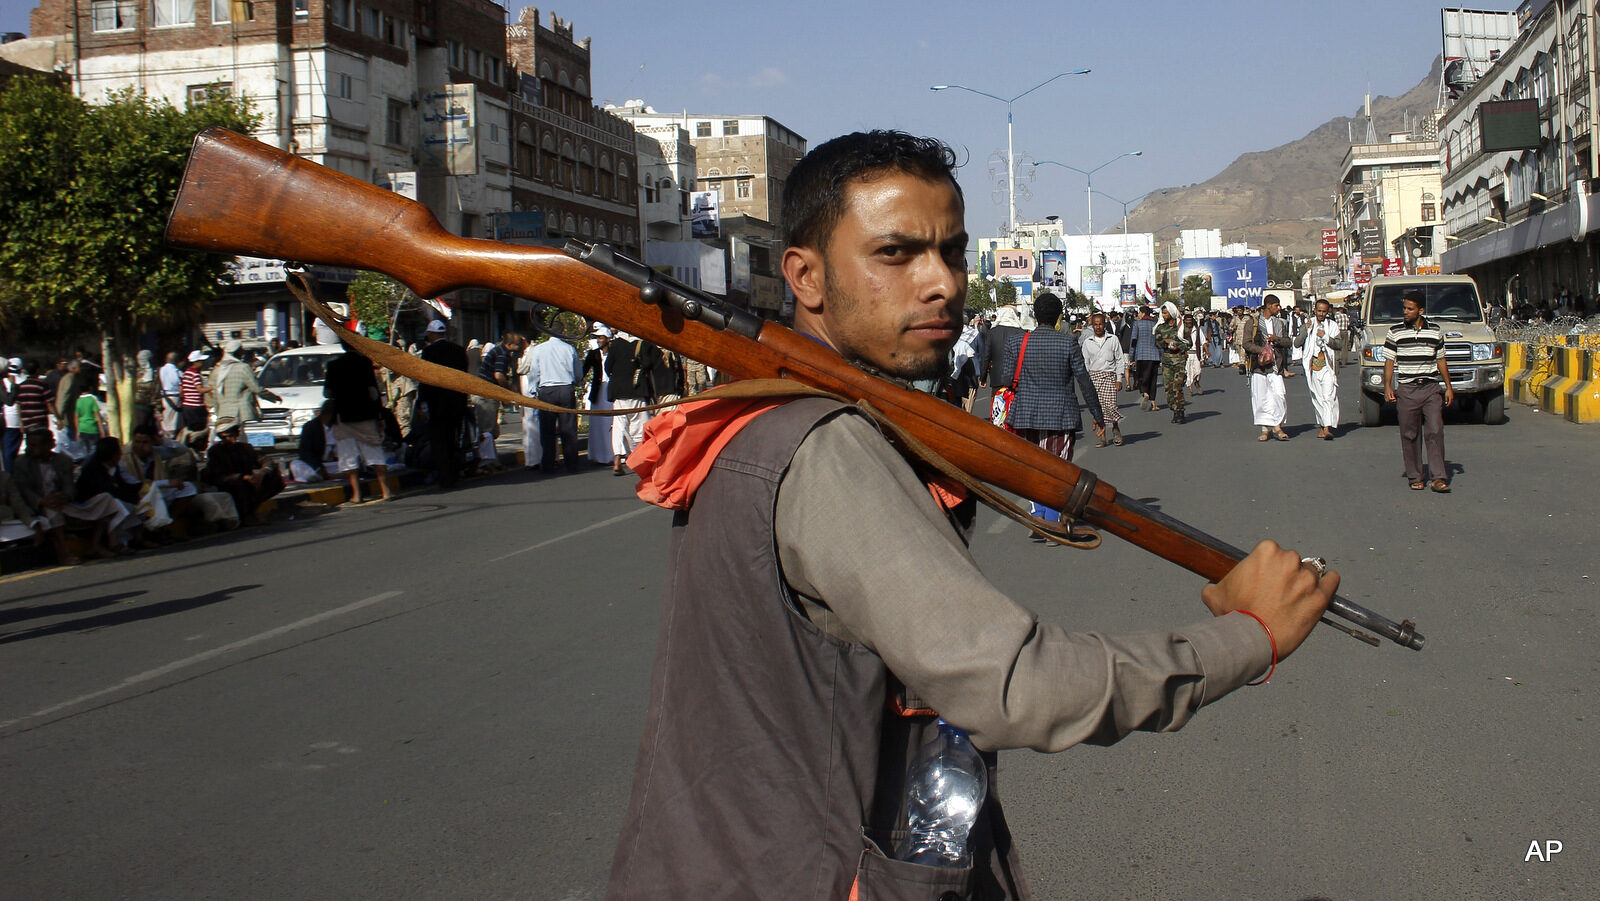 A Houthi Shiite rebel carries his weapon as he joins others to protest against Saudi-led airstrikes, during a rally in Sanaa, Yemen, April 1, 2015. . (AP/Hani Mohammed)